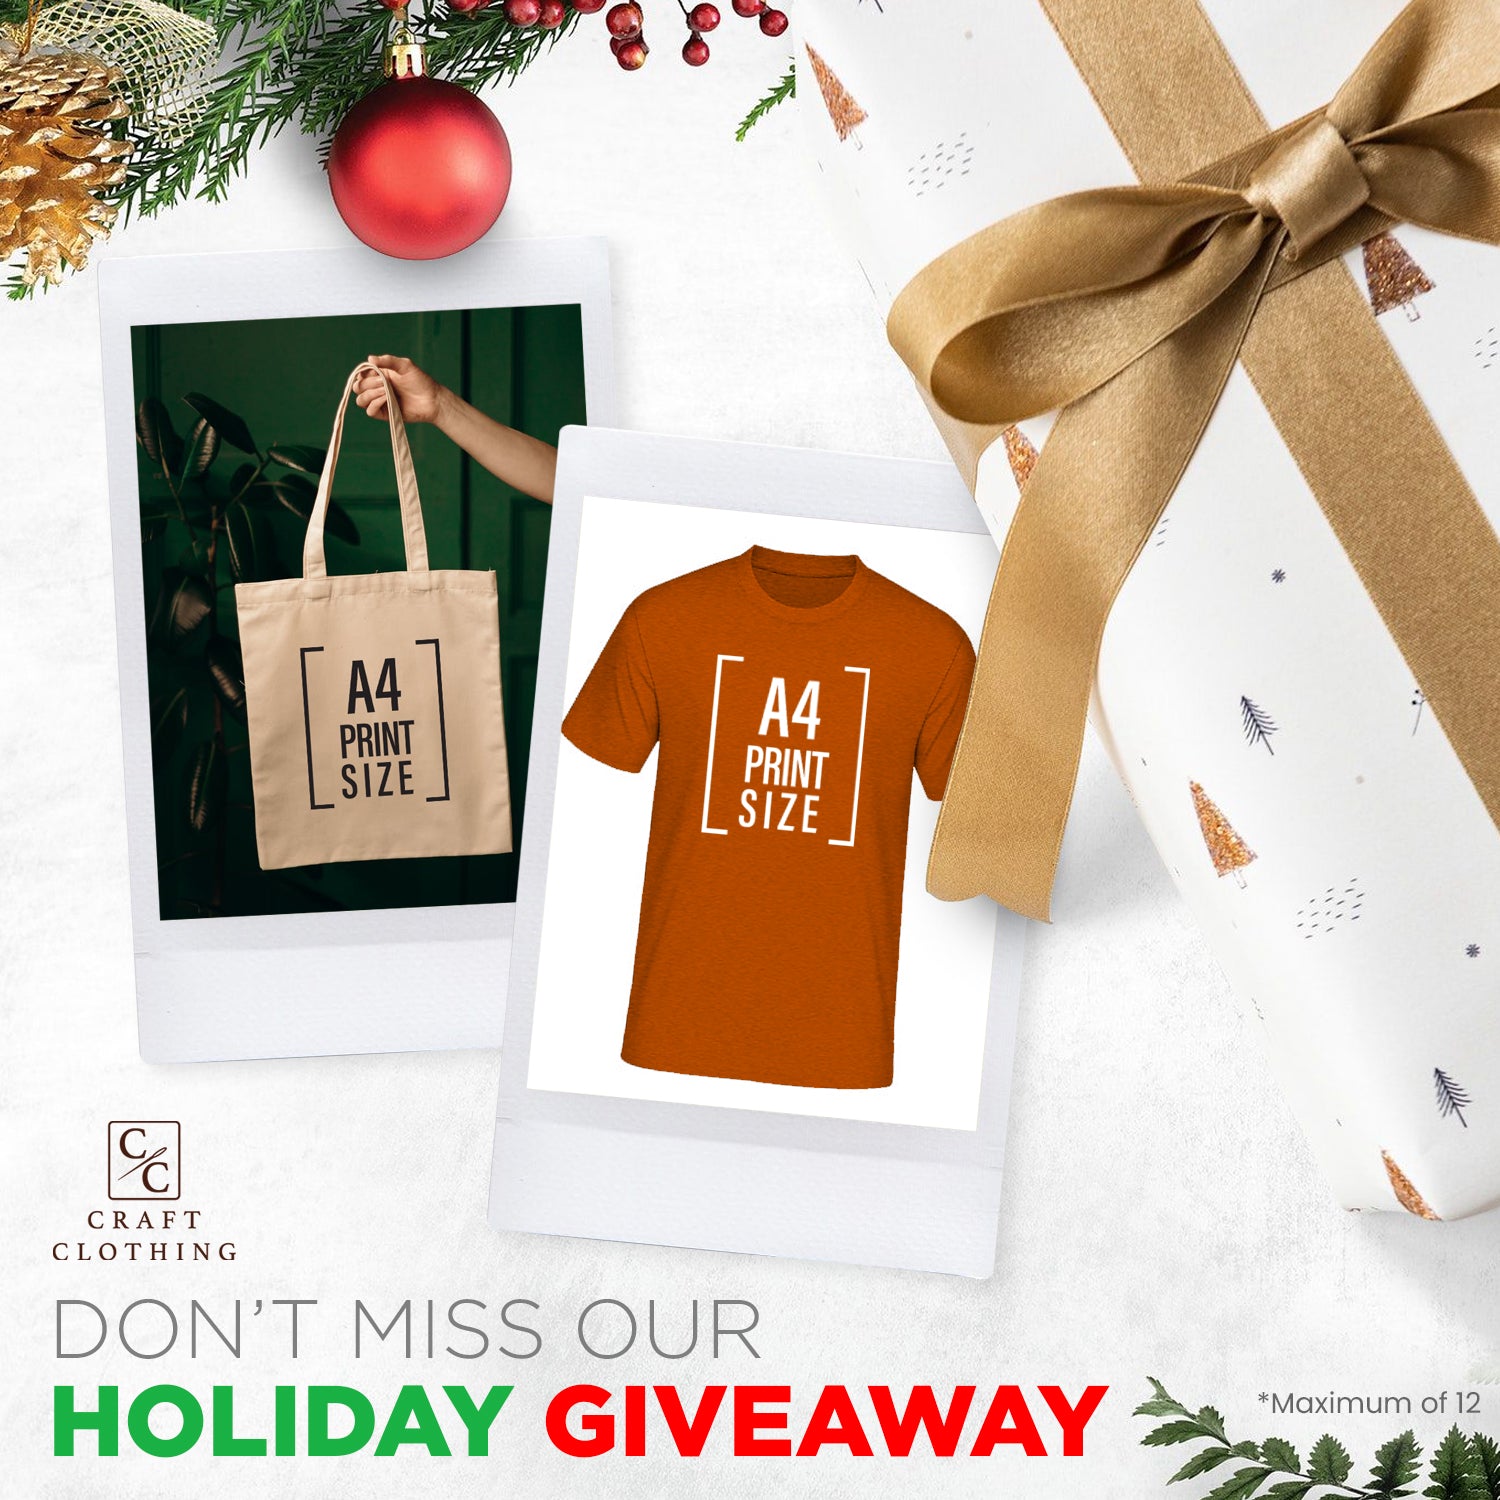 DON'T MISS OUR HOLIDAY GIVEAWAY